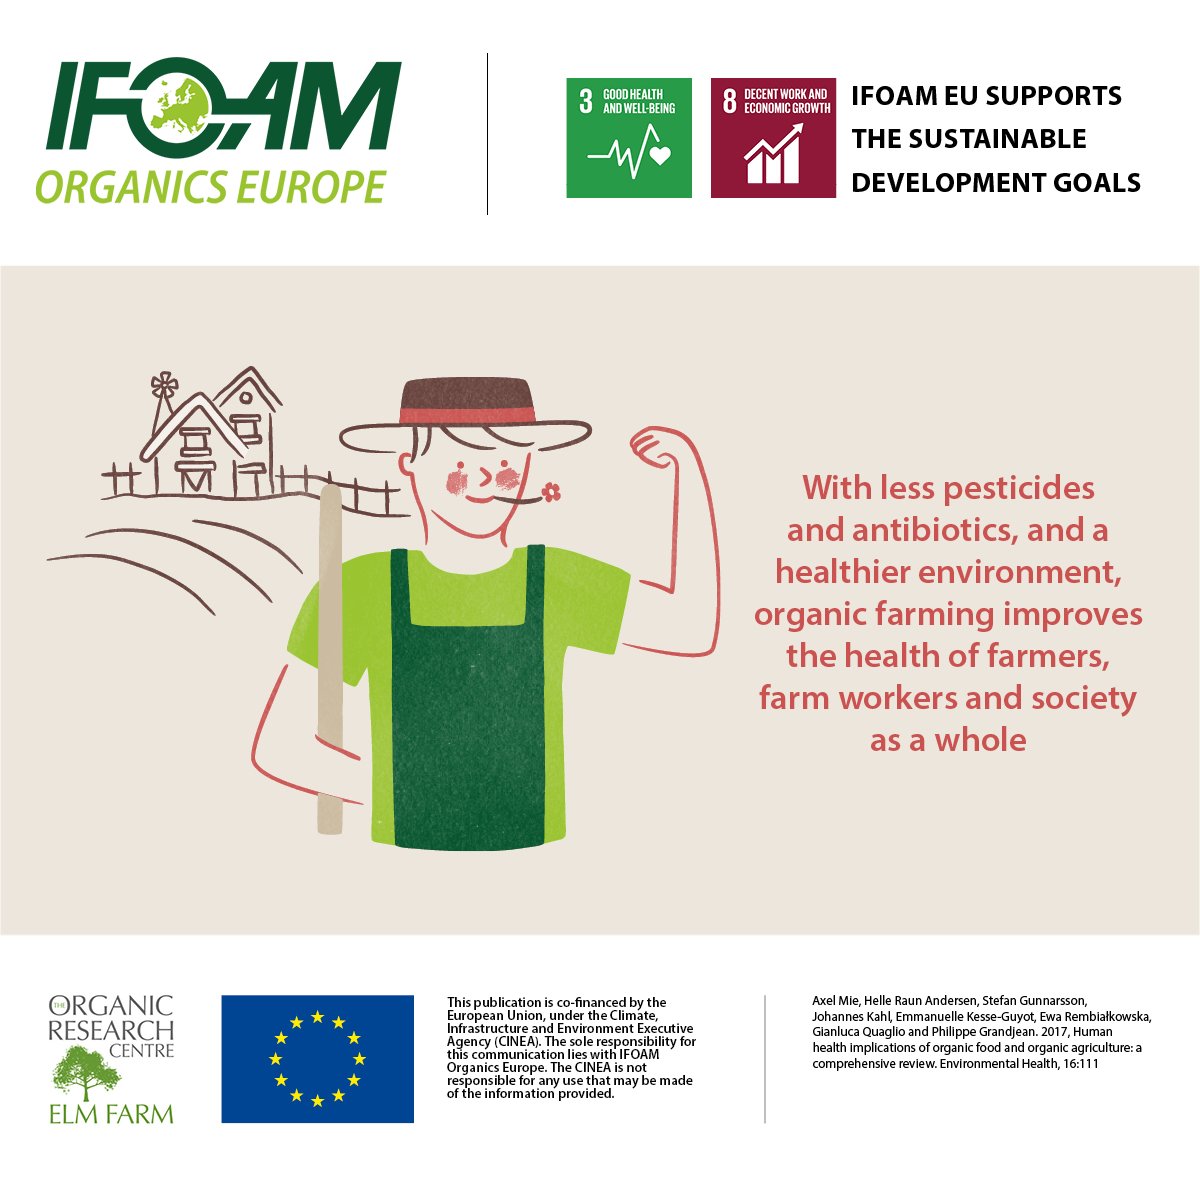 With less pesticides and antibiotics, and a healthier environment, #OrganicFarming improves the health of farmers, farm workers and society as a whole 🌱🐝👩‍🌾🧑‍🌾🌍 
#EUorganicDay #EUOrganic #OrganicSeptember #OrganicIsPartOfTheSolution #OrganicDelivers